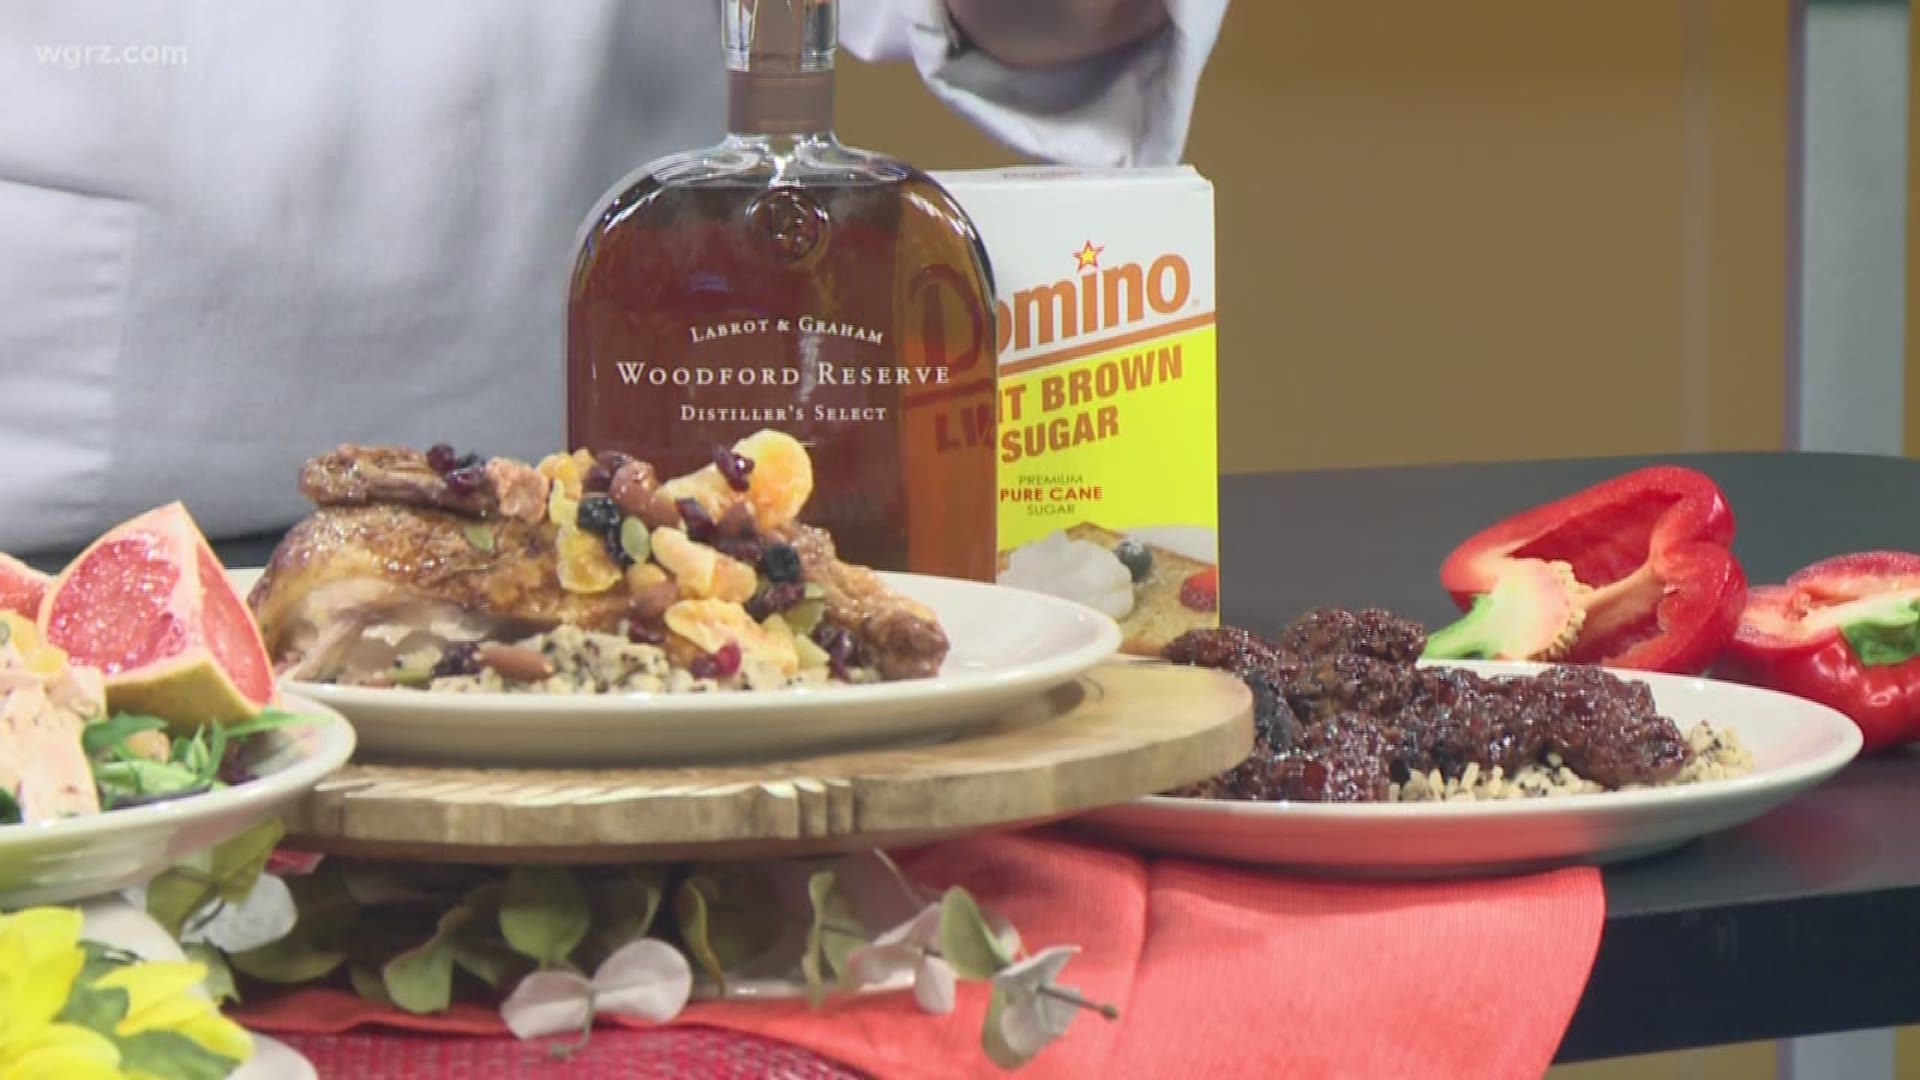 Maple syrup isn't just for pancakes. Chef Binks stopped by Daybreak to share some easy ways to add an extra layer of flavor using fresh maple syrup.